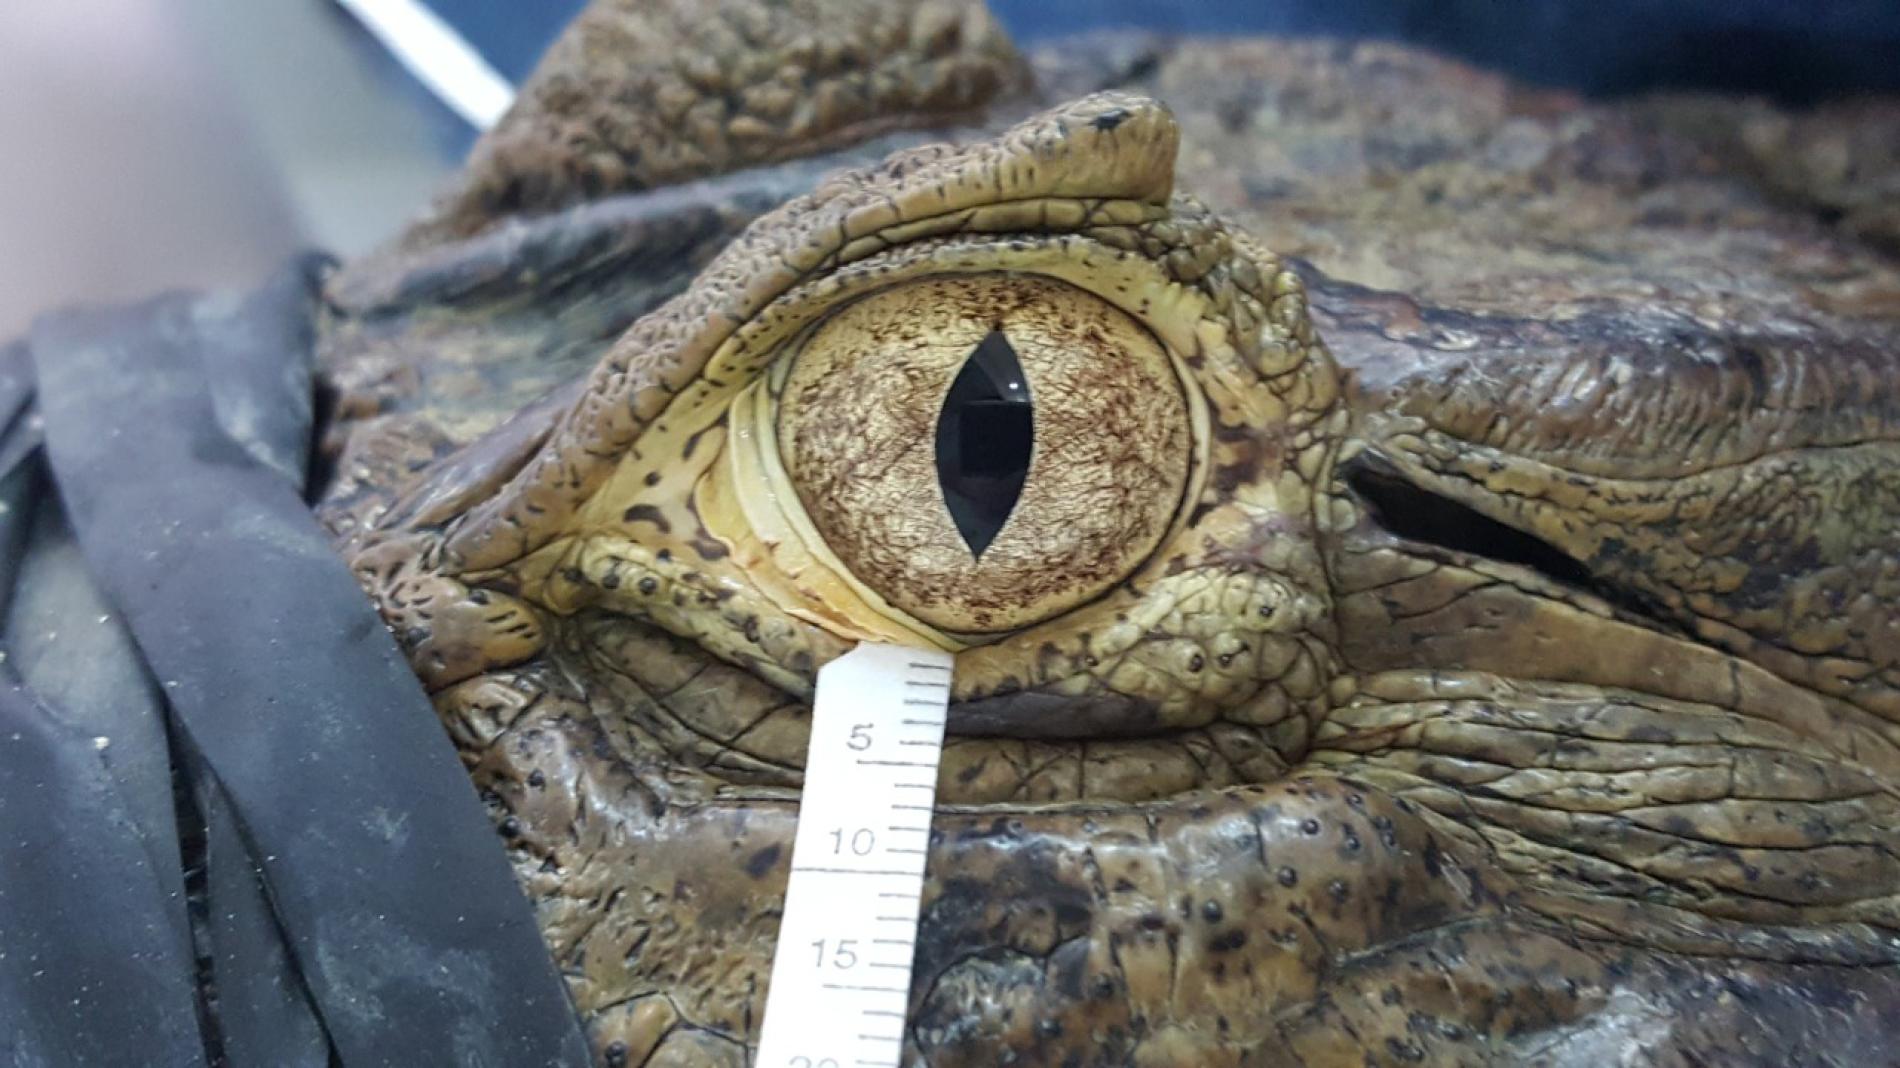 ‘Crocodile tears’ are surprisingly similar to our private